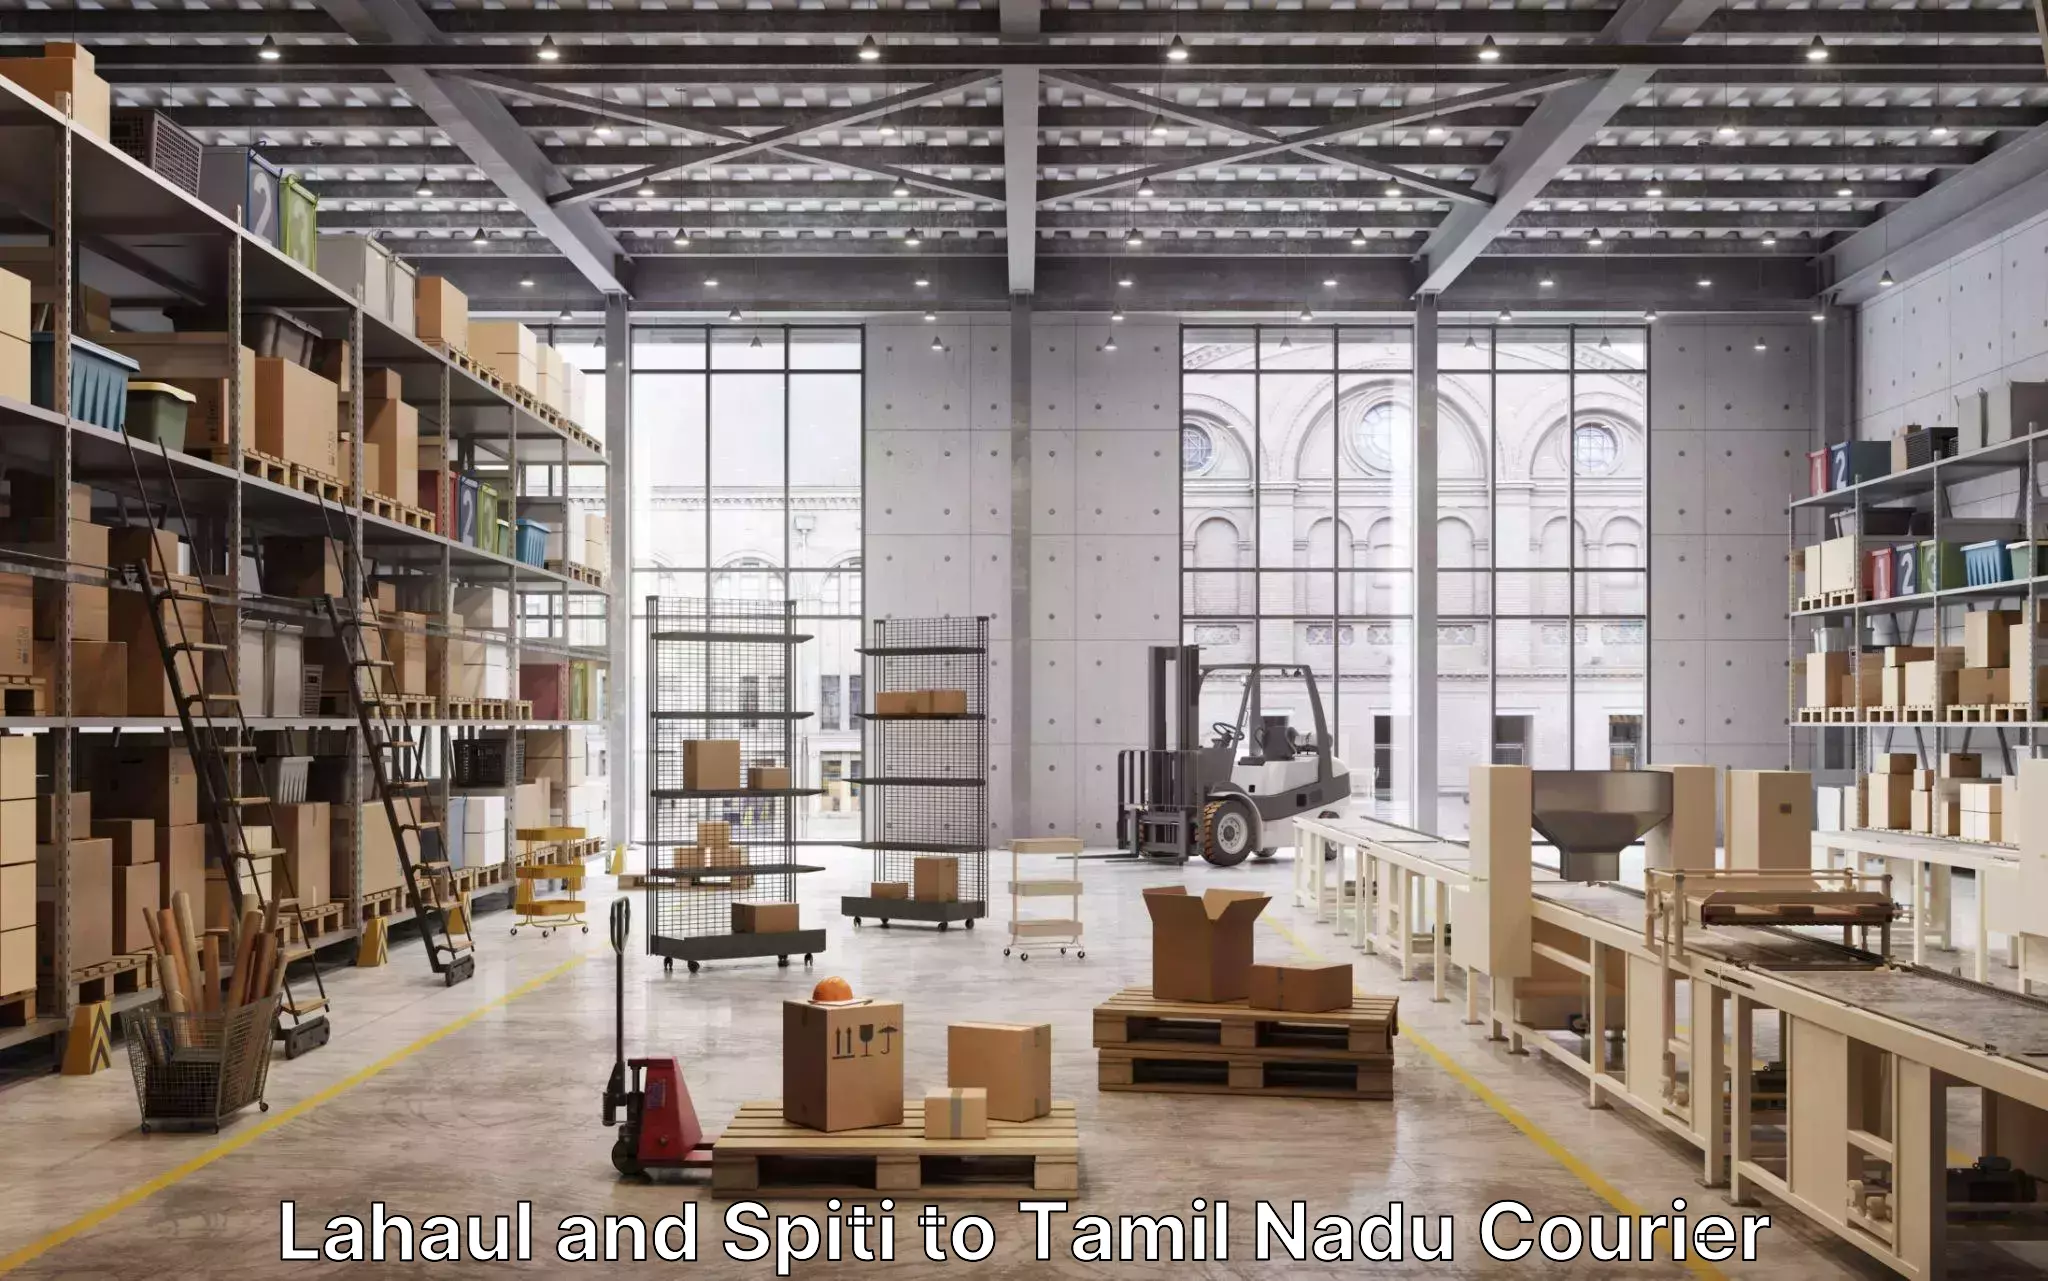 Furniture delivery service Lahaul and Spiti to Tamil Nadu